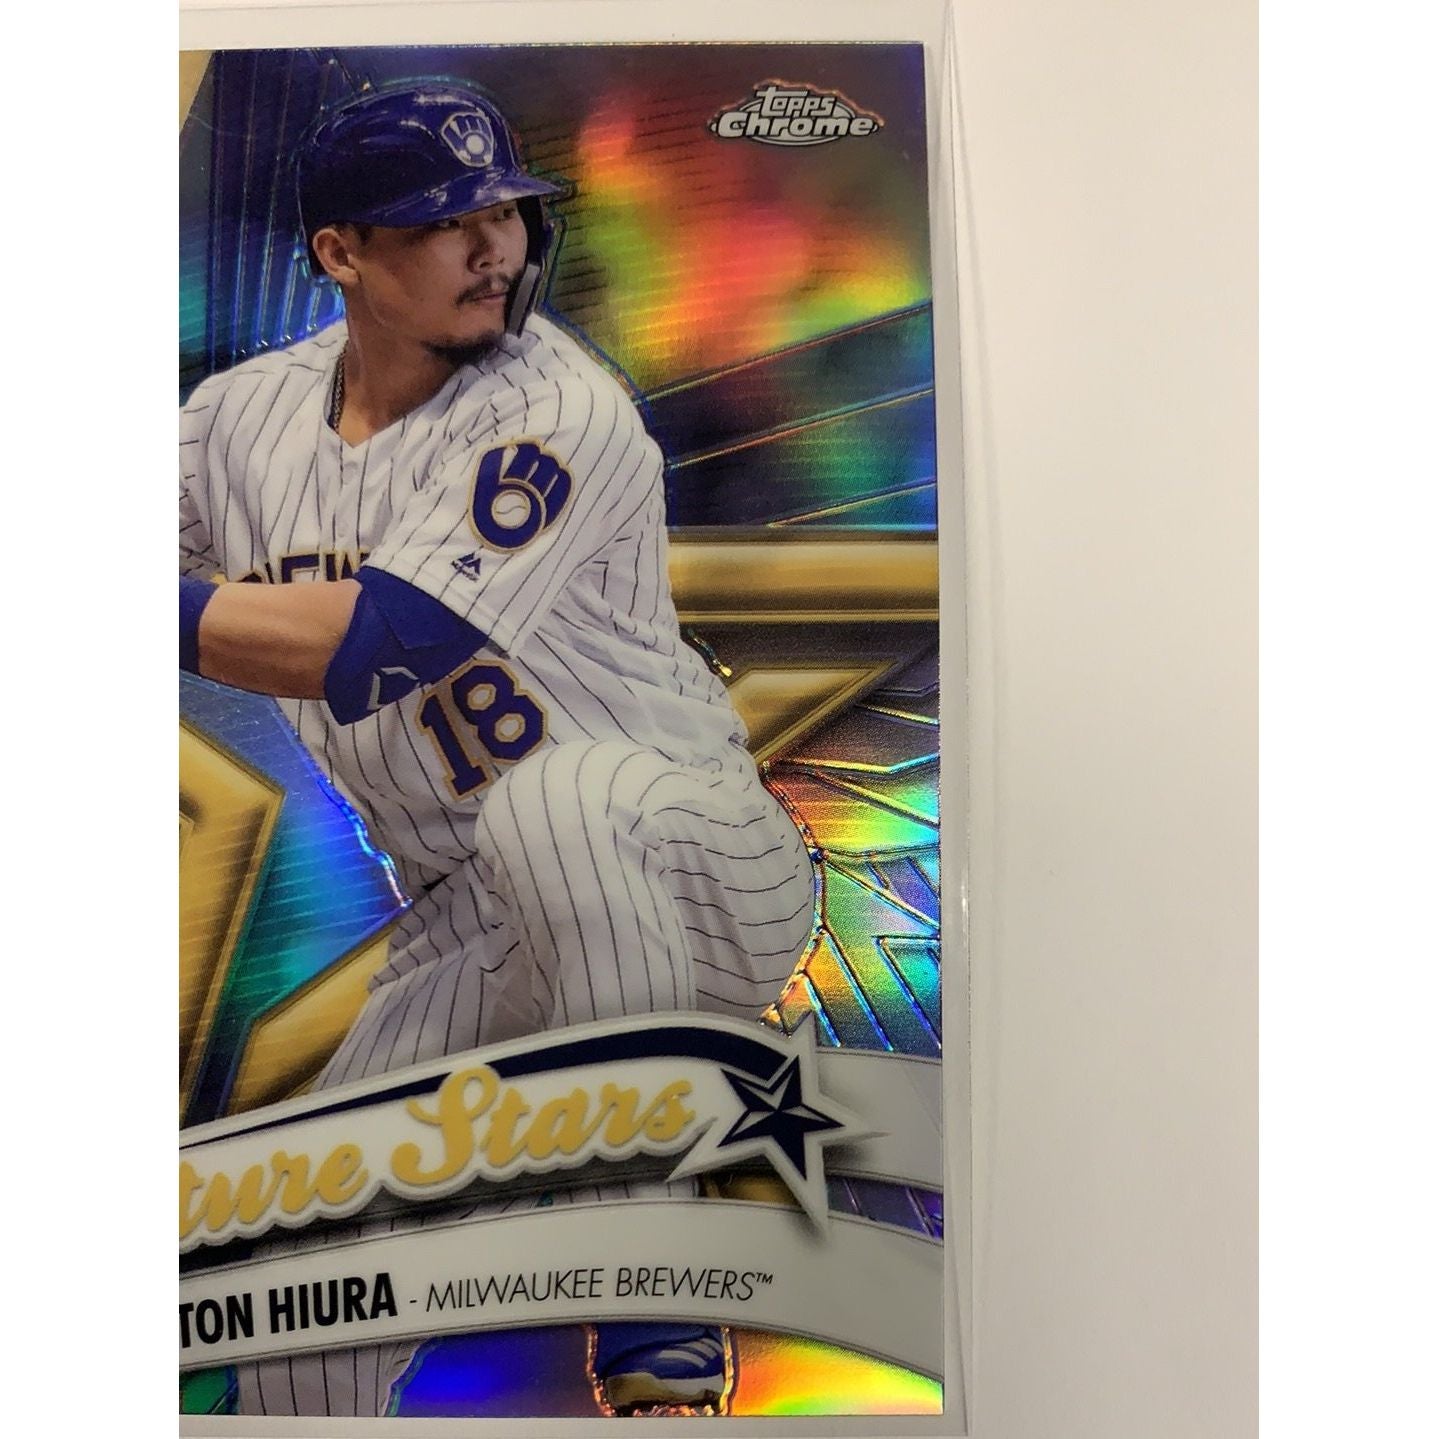  2020 Topps Chrome Keaton Hiura Future Stars  Local Legends Cards & Collectibles